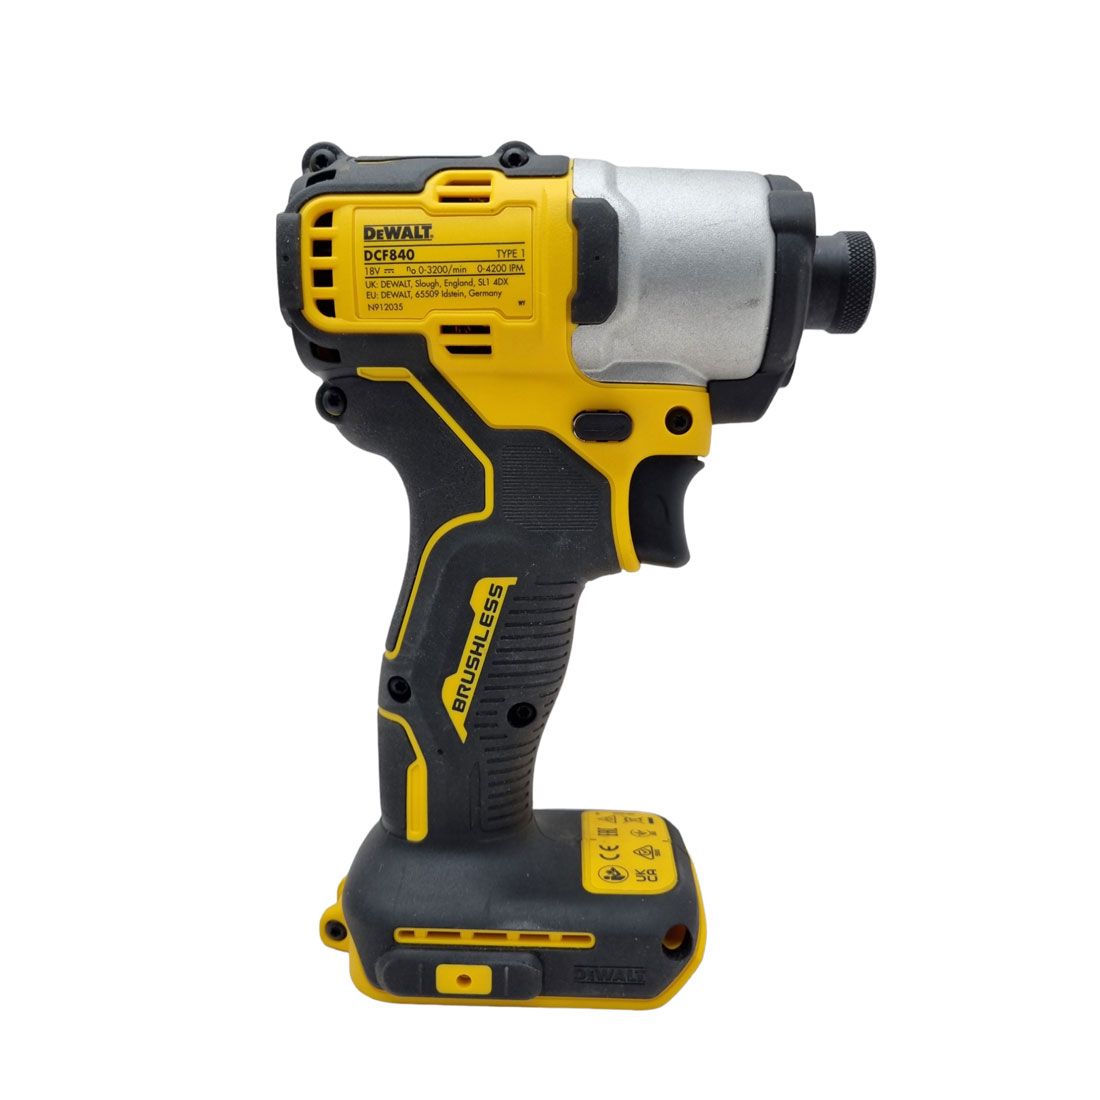 DEWALT DCF840NT-XJ 18V XR BRUSHLESS COMPACT IMPACT DRIVER BODY ONLY IN CARRY CASE